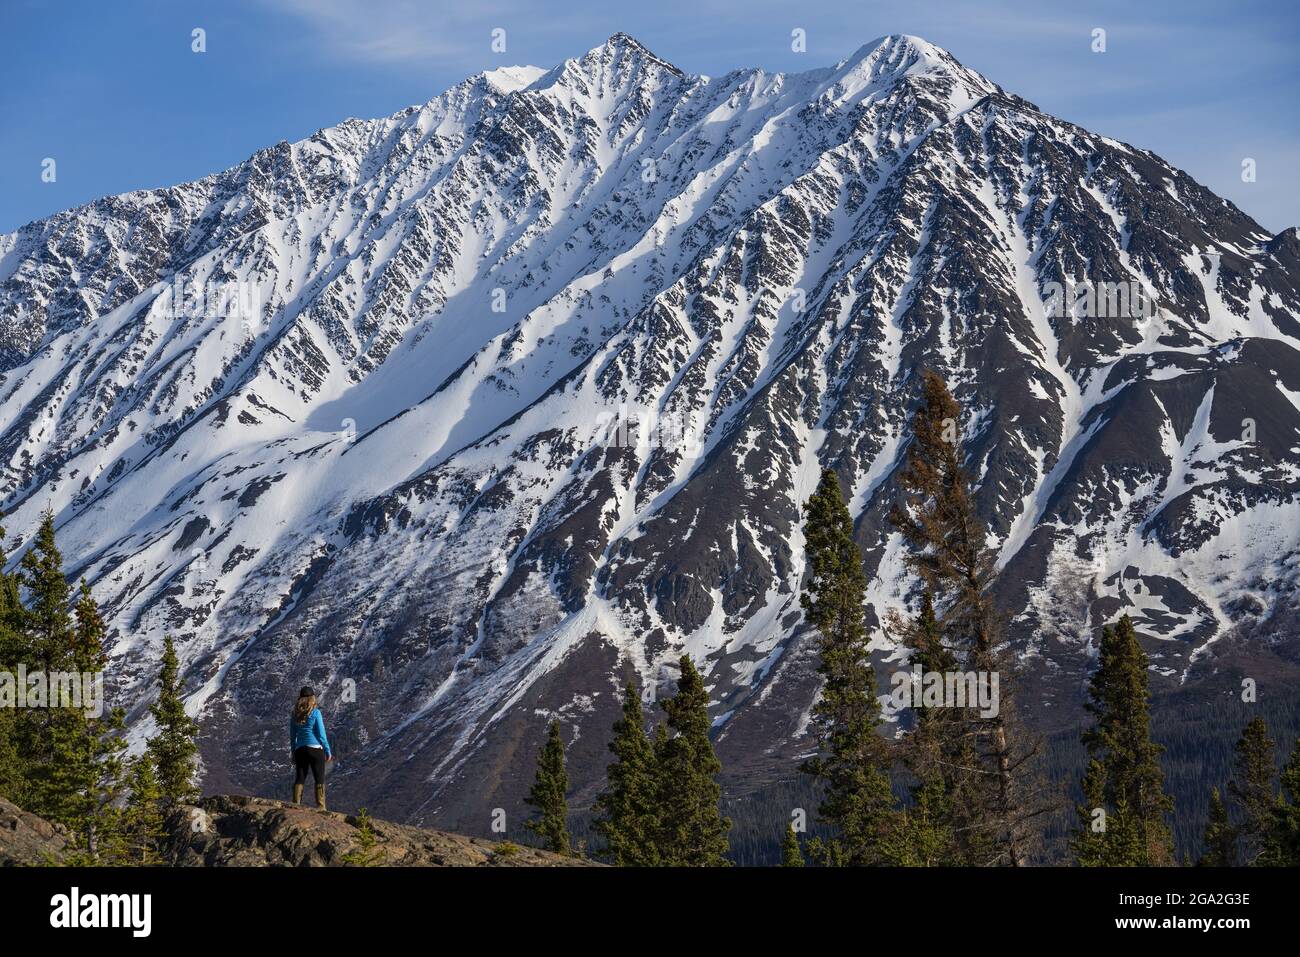 View from behind of a woman standing on mountainside looking at the imposing view of a majestic snowcapped mountain, situated in the Traditional Te... Stock Photo